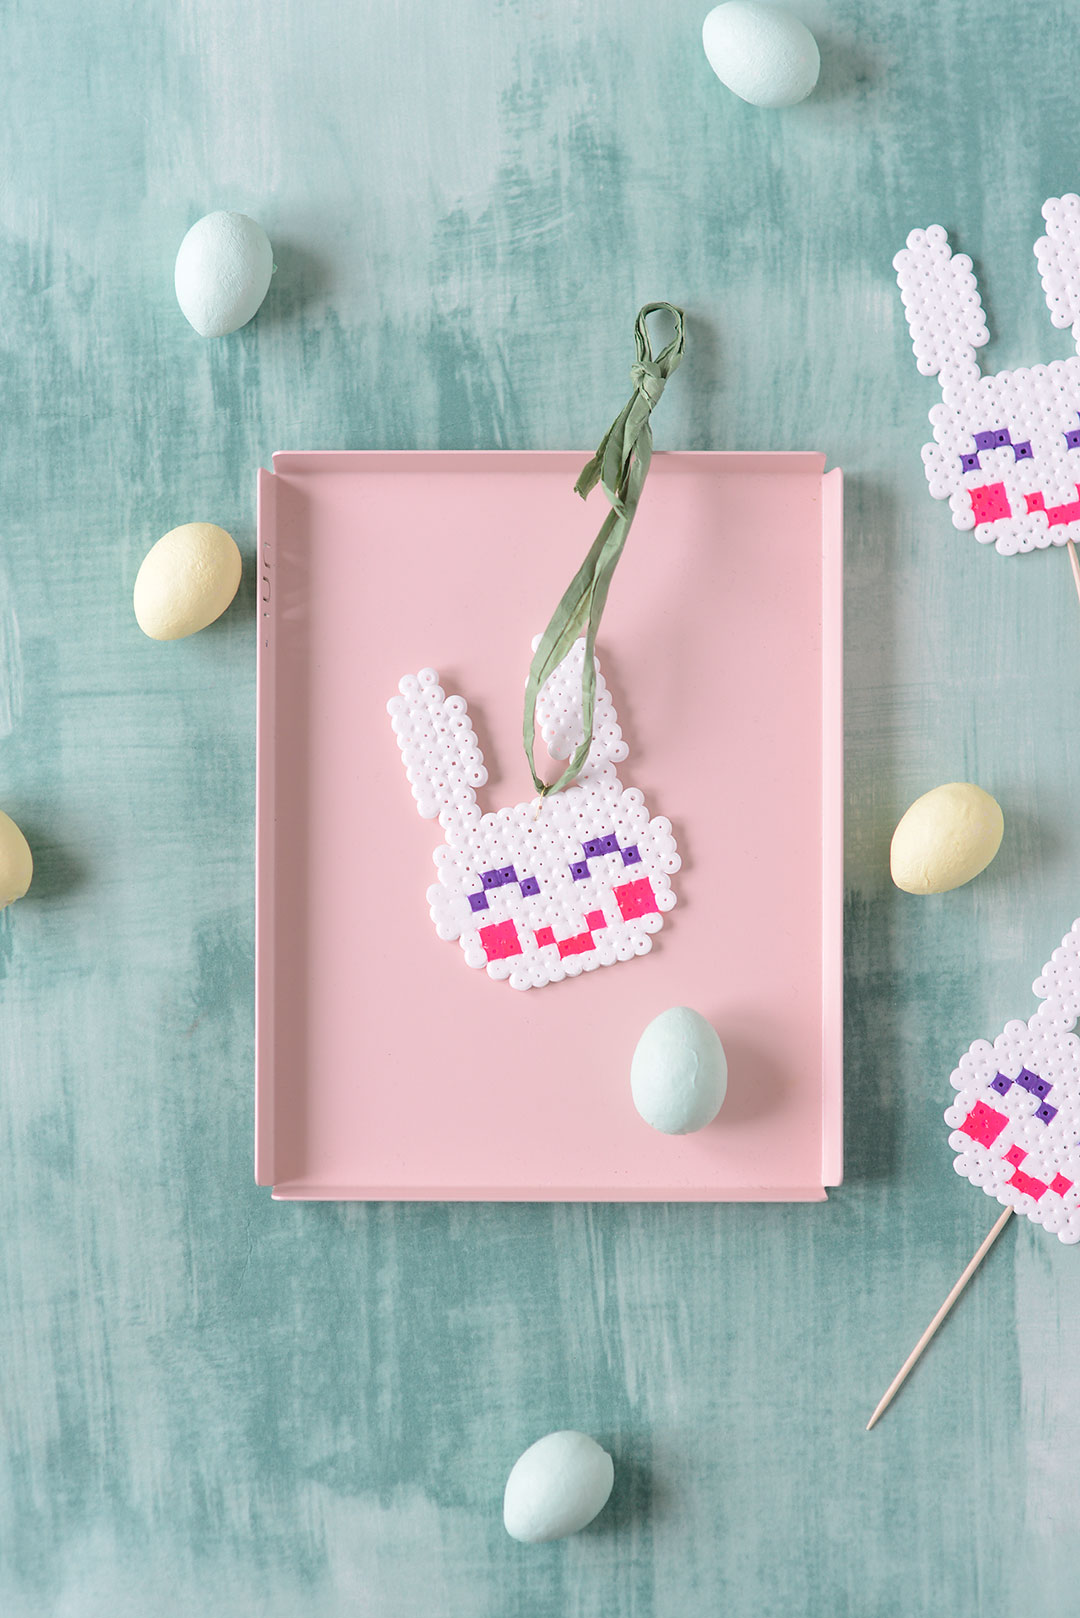 Hama bead bunny ornament for easter